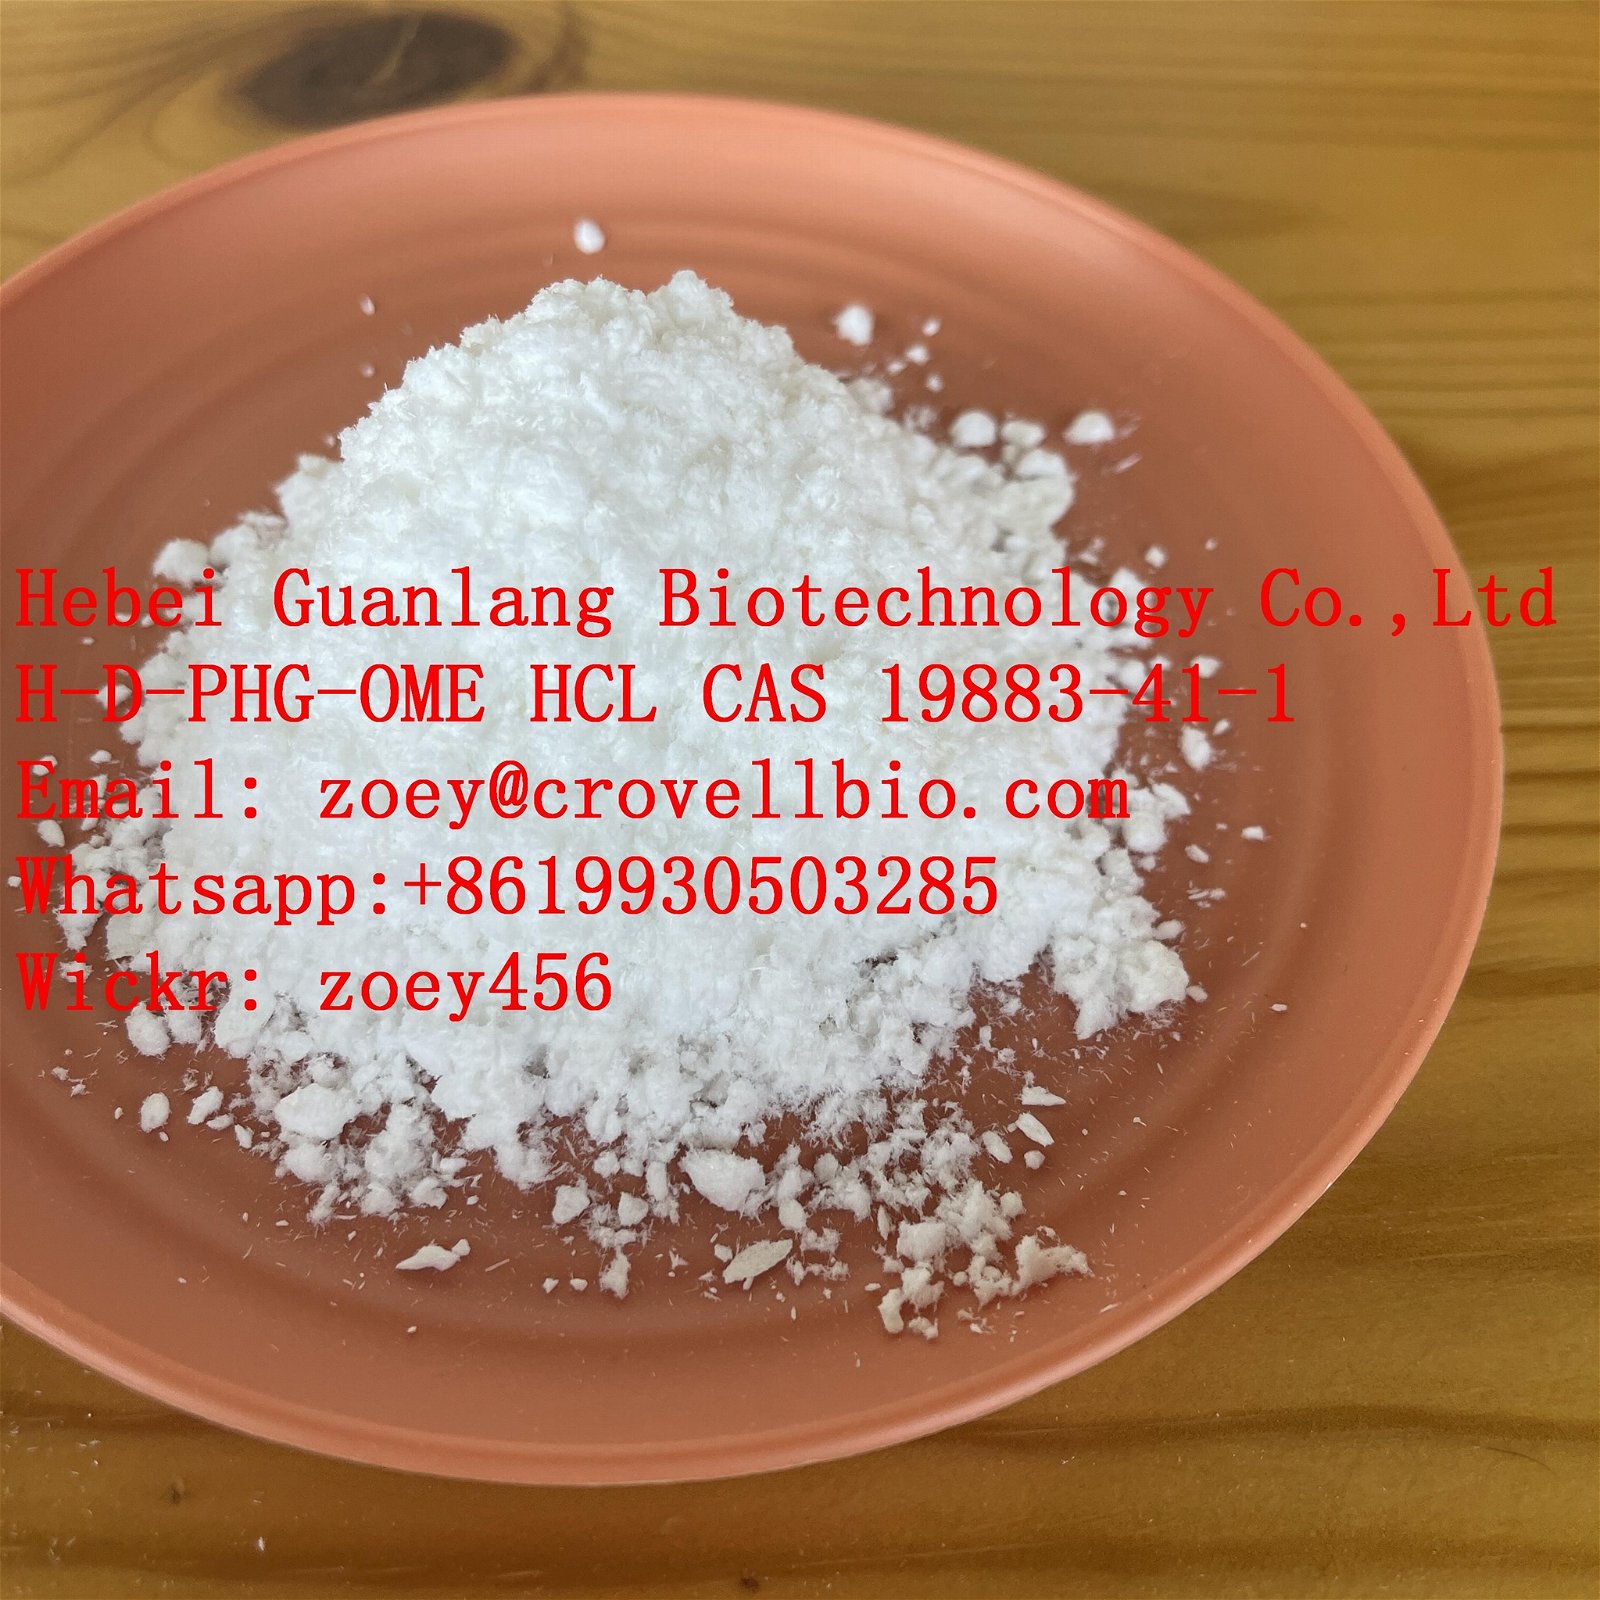 Factory supply CAS 19883-41-1 H-D-PHG-OME HCL supplier in China with low price  